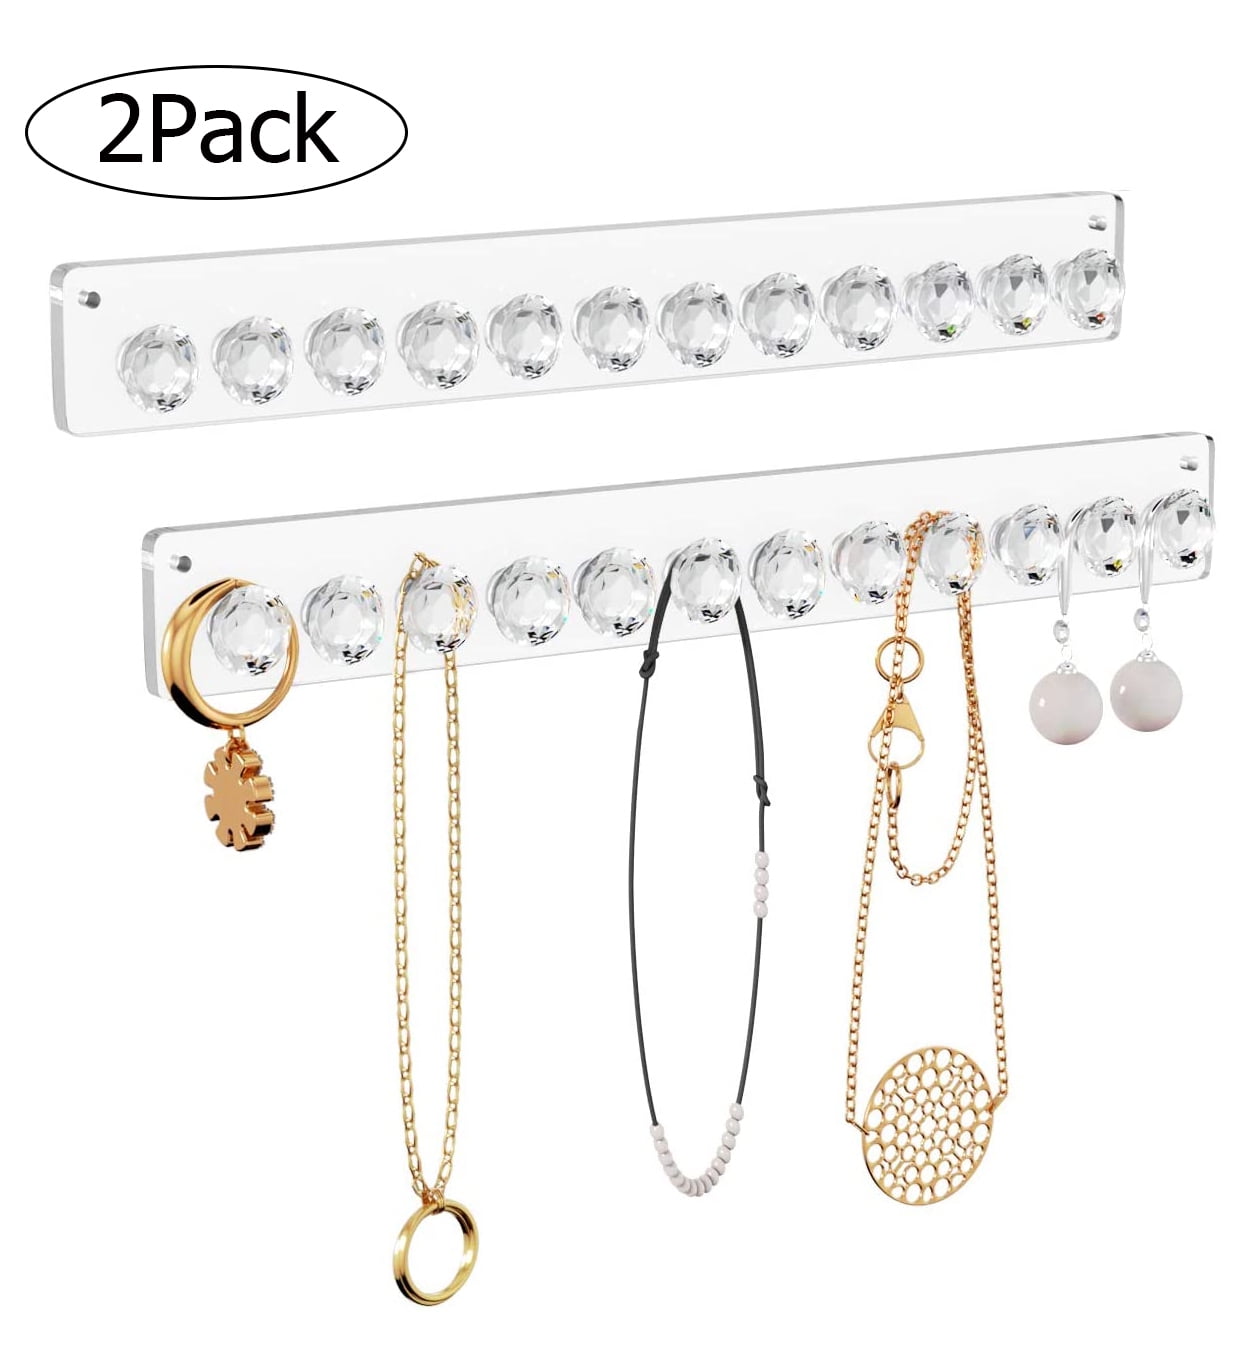 9Pcs/set Jewelry Wall Hanger Holder Stand Bracelet Necklace Earring Show Disply 